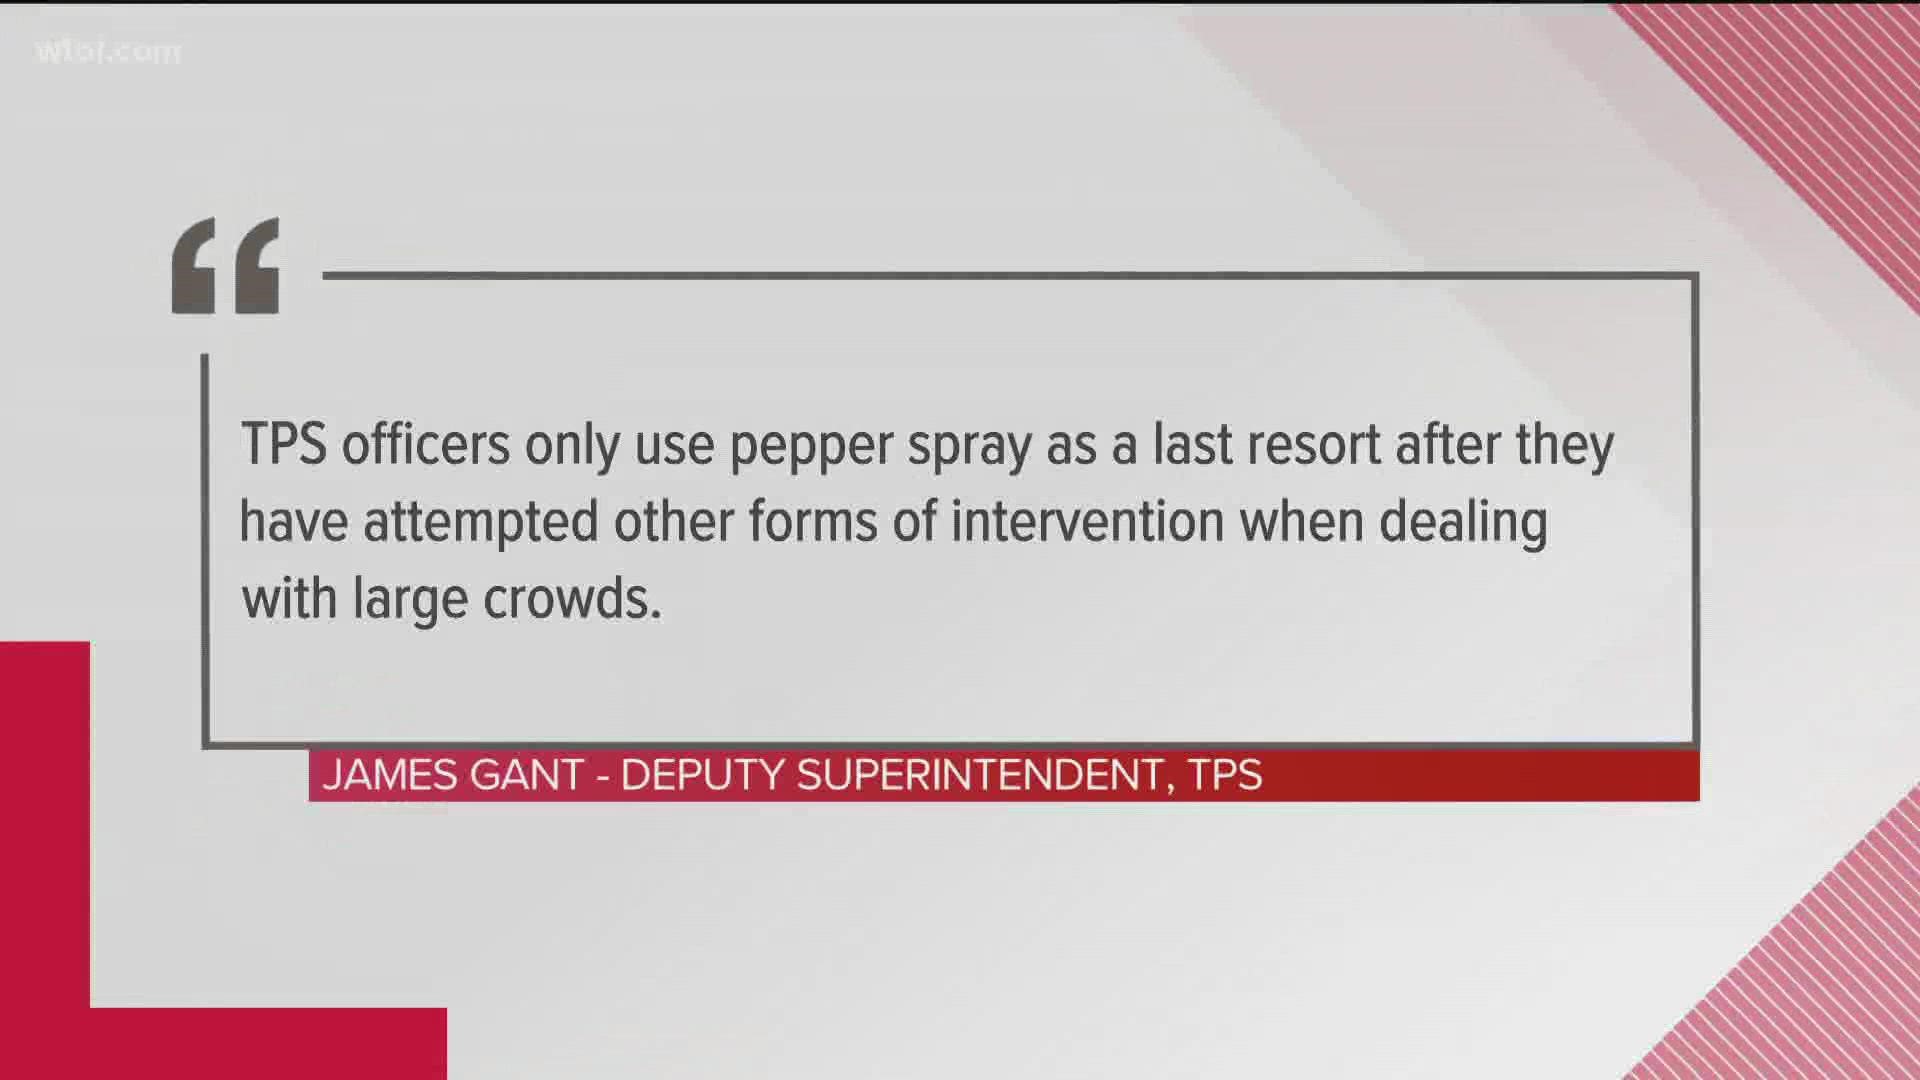 TPS said officers are told to only use pepper spray as a last resort.